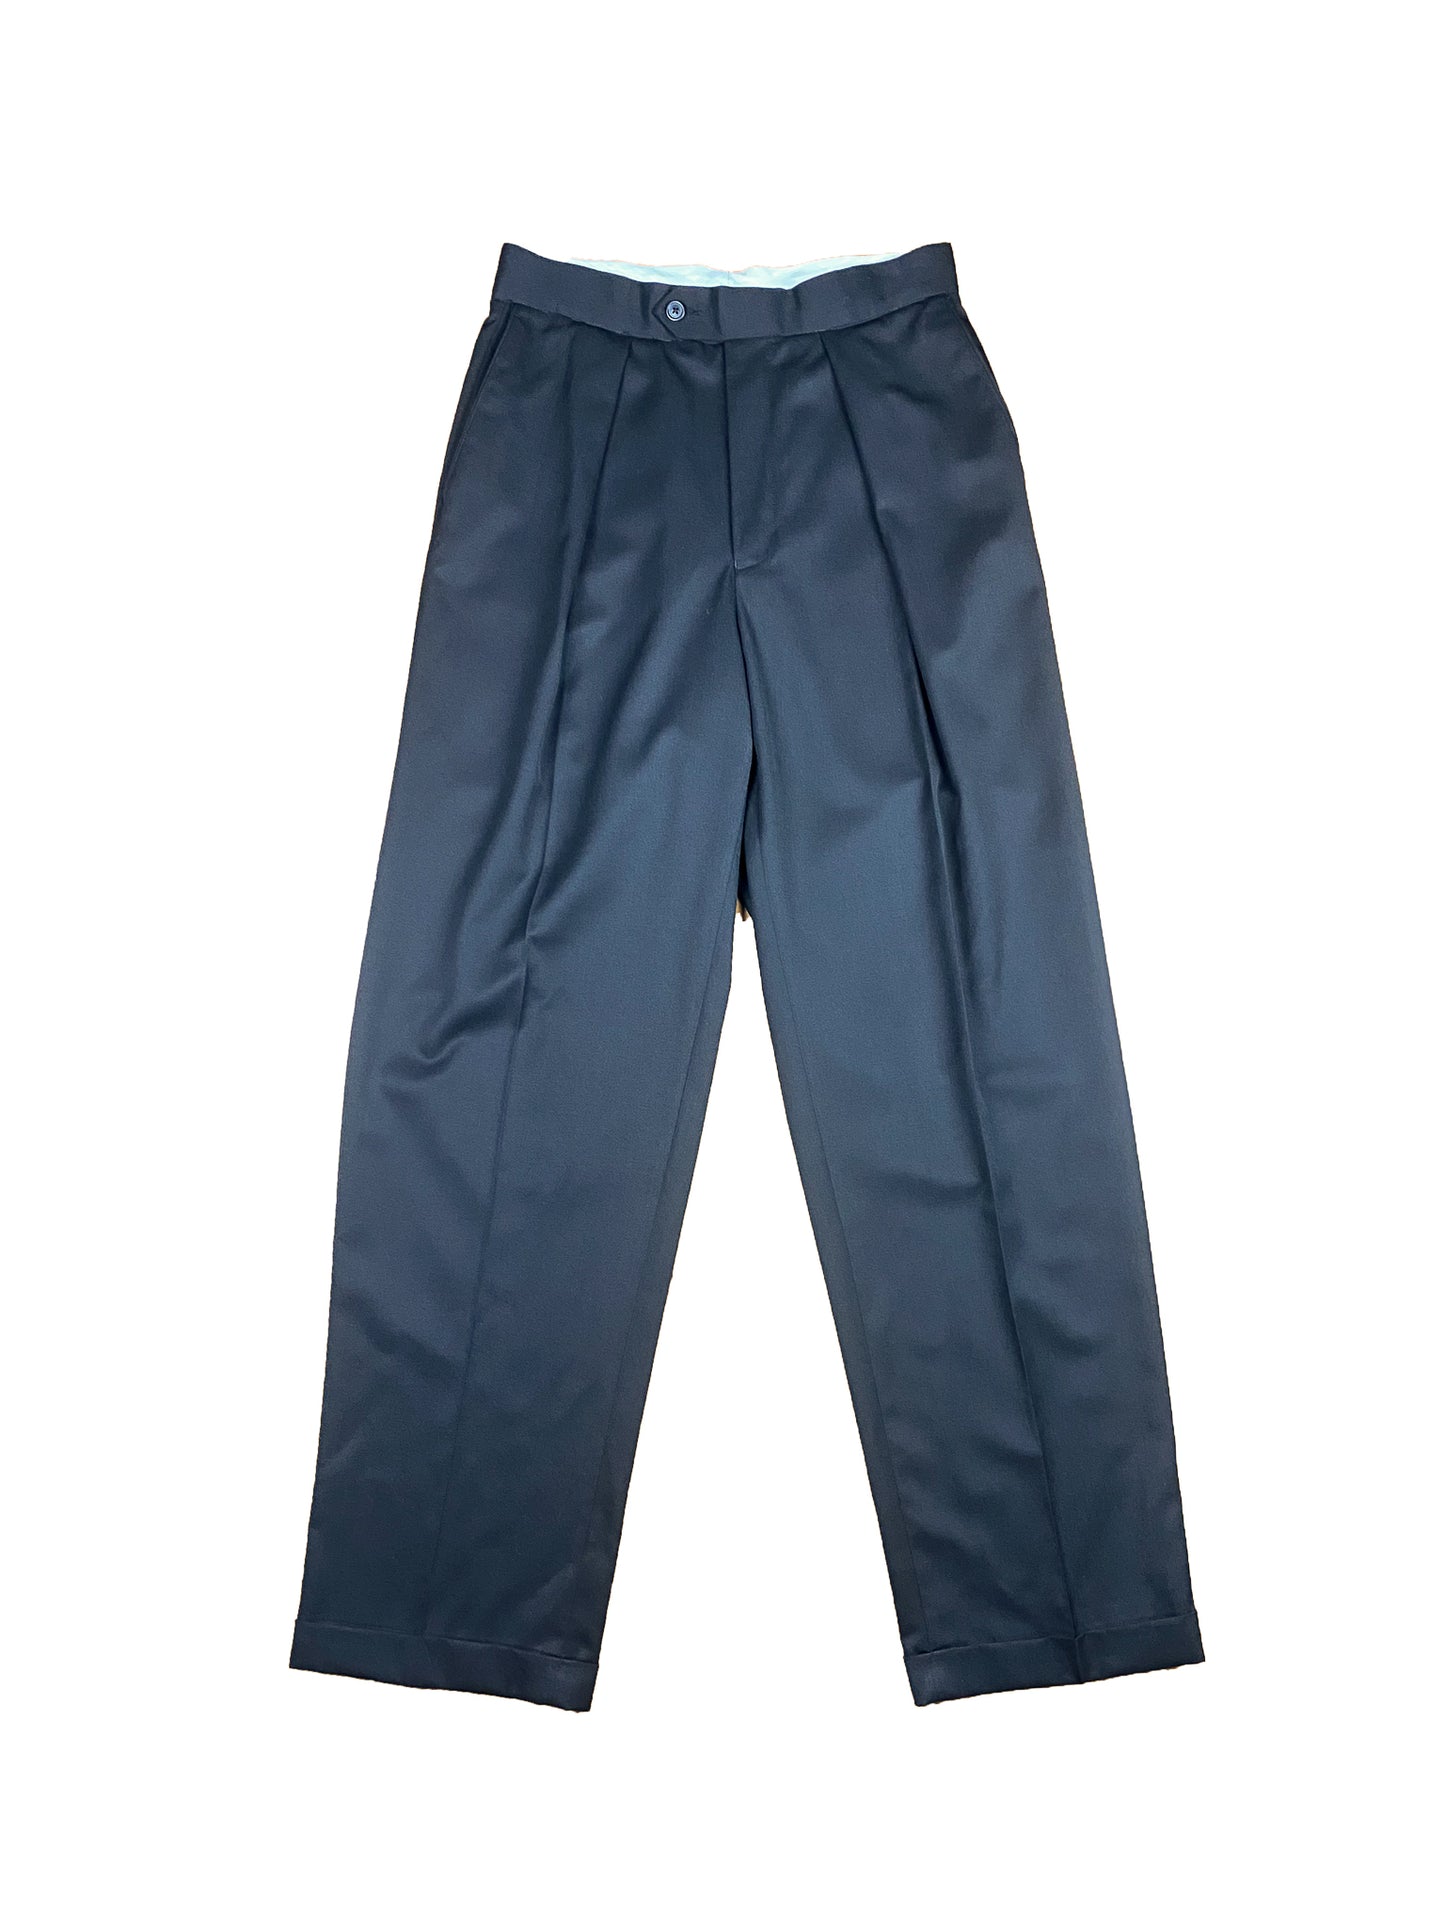 Unisex Oversize Pleated Crease Trousers